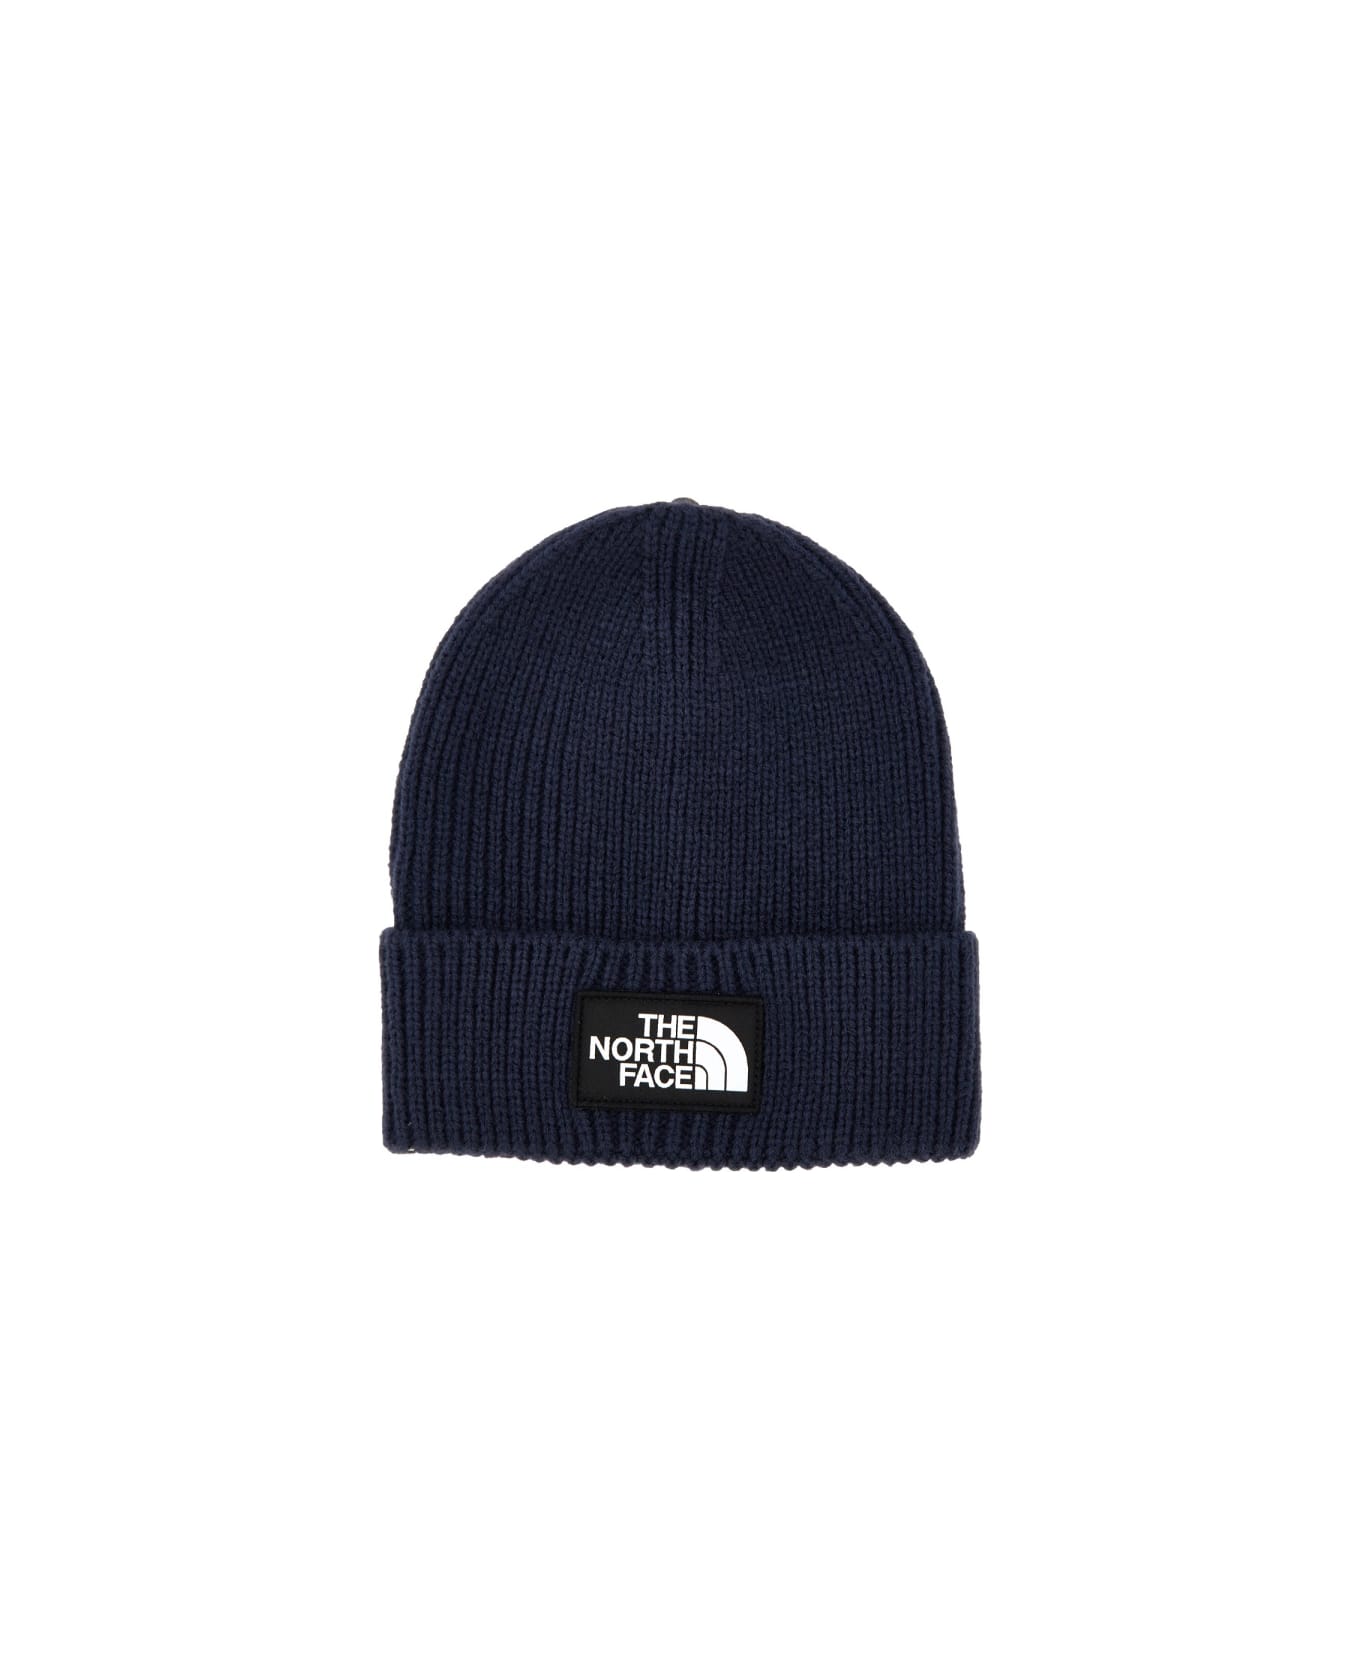 The North Face Beanie Hat - BLUE